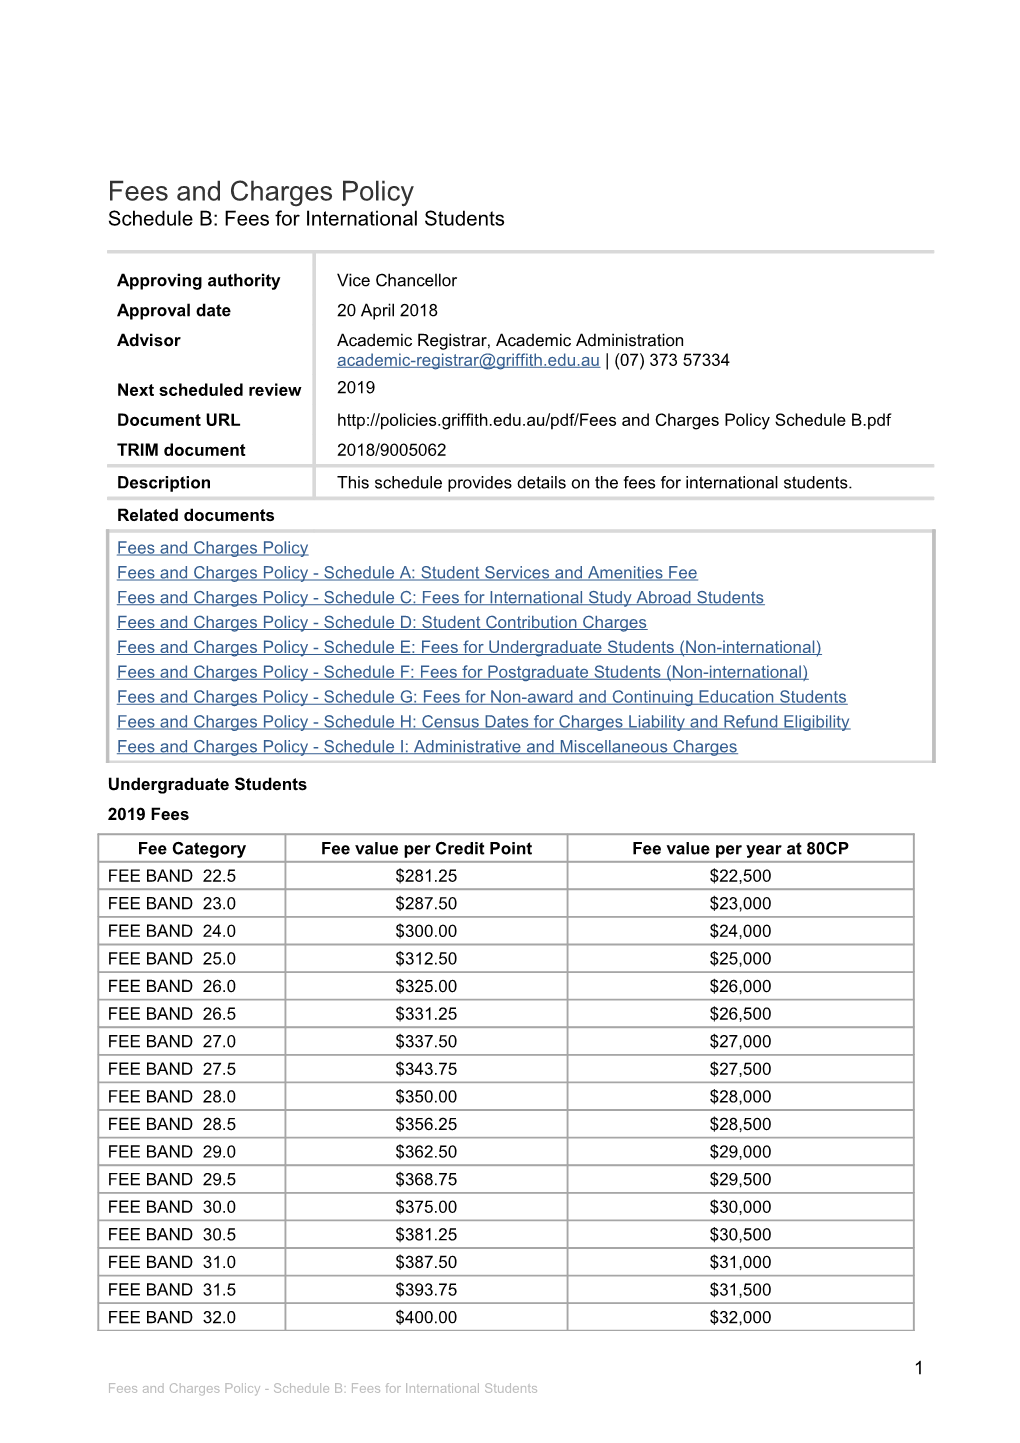 Fees and Charges Policy - Schedule B: Fees for International Students